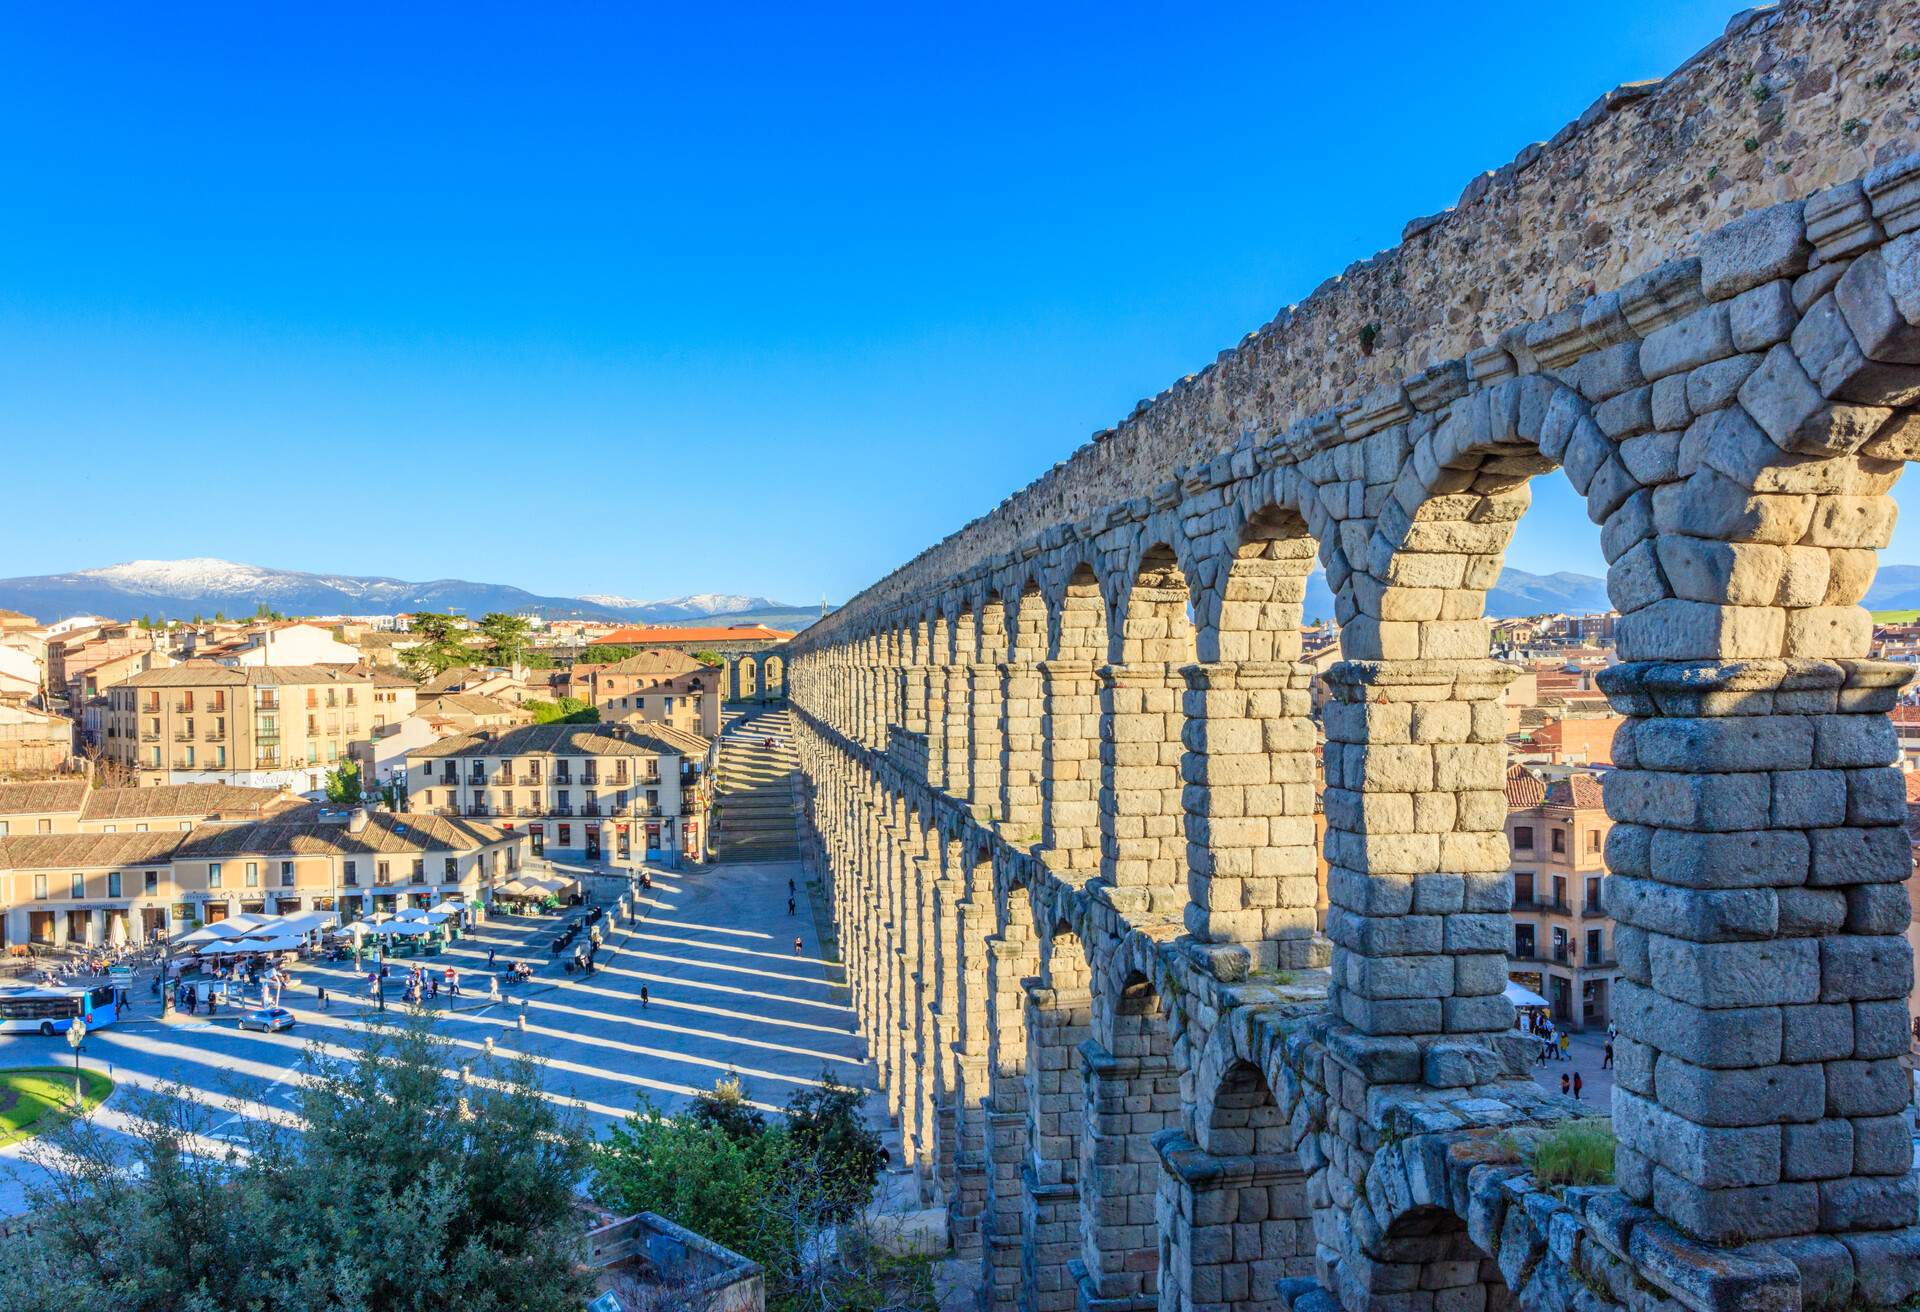 View of Roman Aqueduct at Plaza del Azoguejo in Segovia, an iconic symbol of the UNESCO listed city. The aqueduct was originally part of a complex system of aqueducts and underground canals that brought water from the mountains more than 15km away.